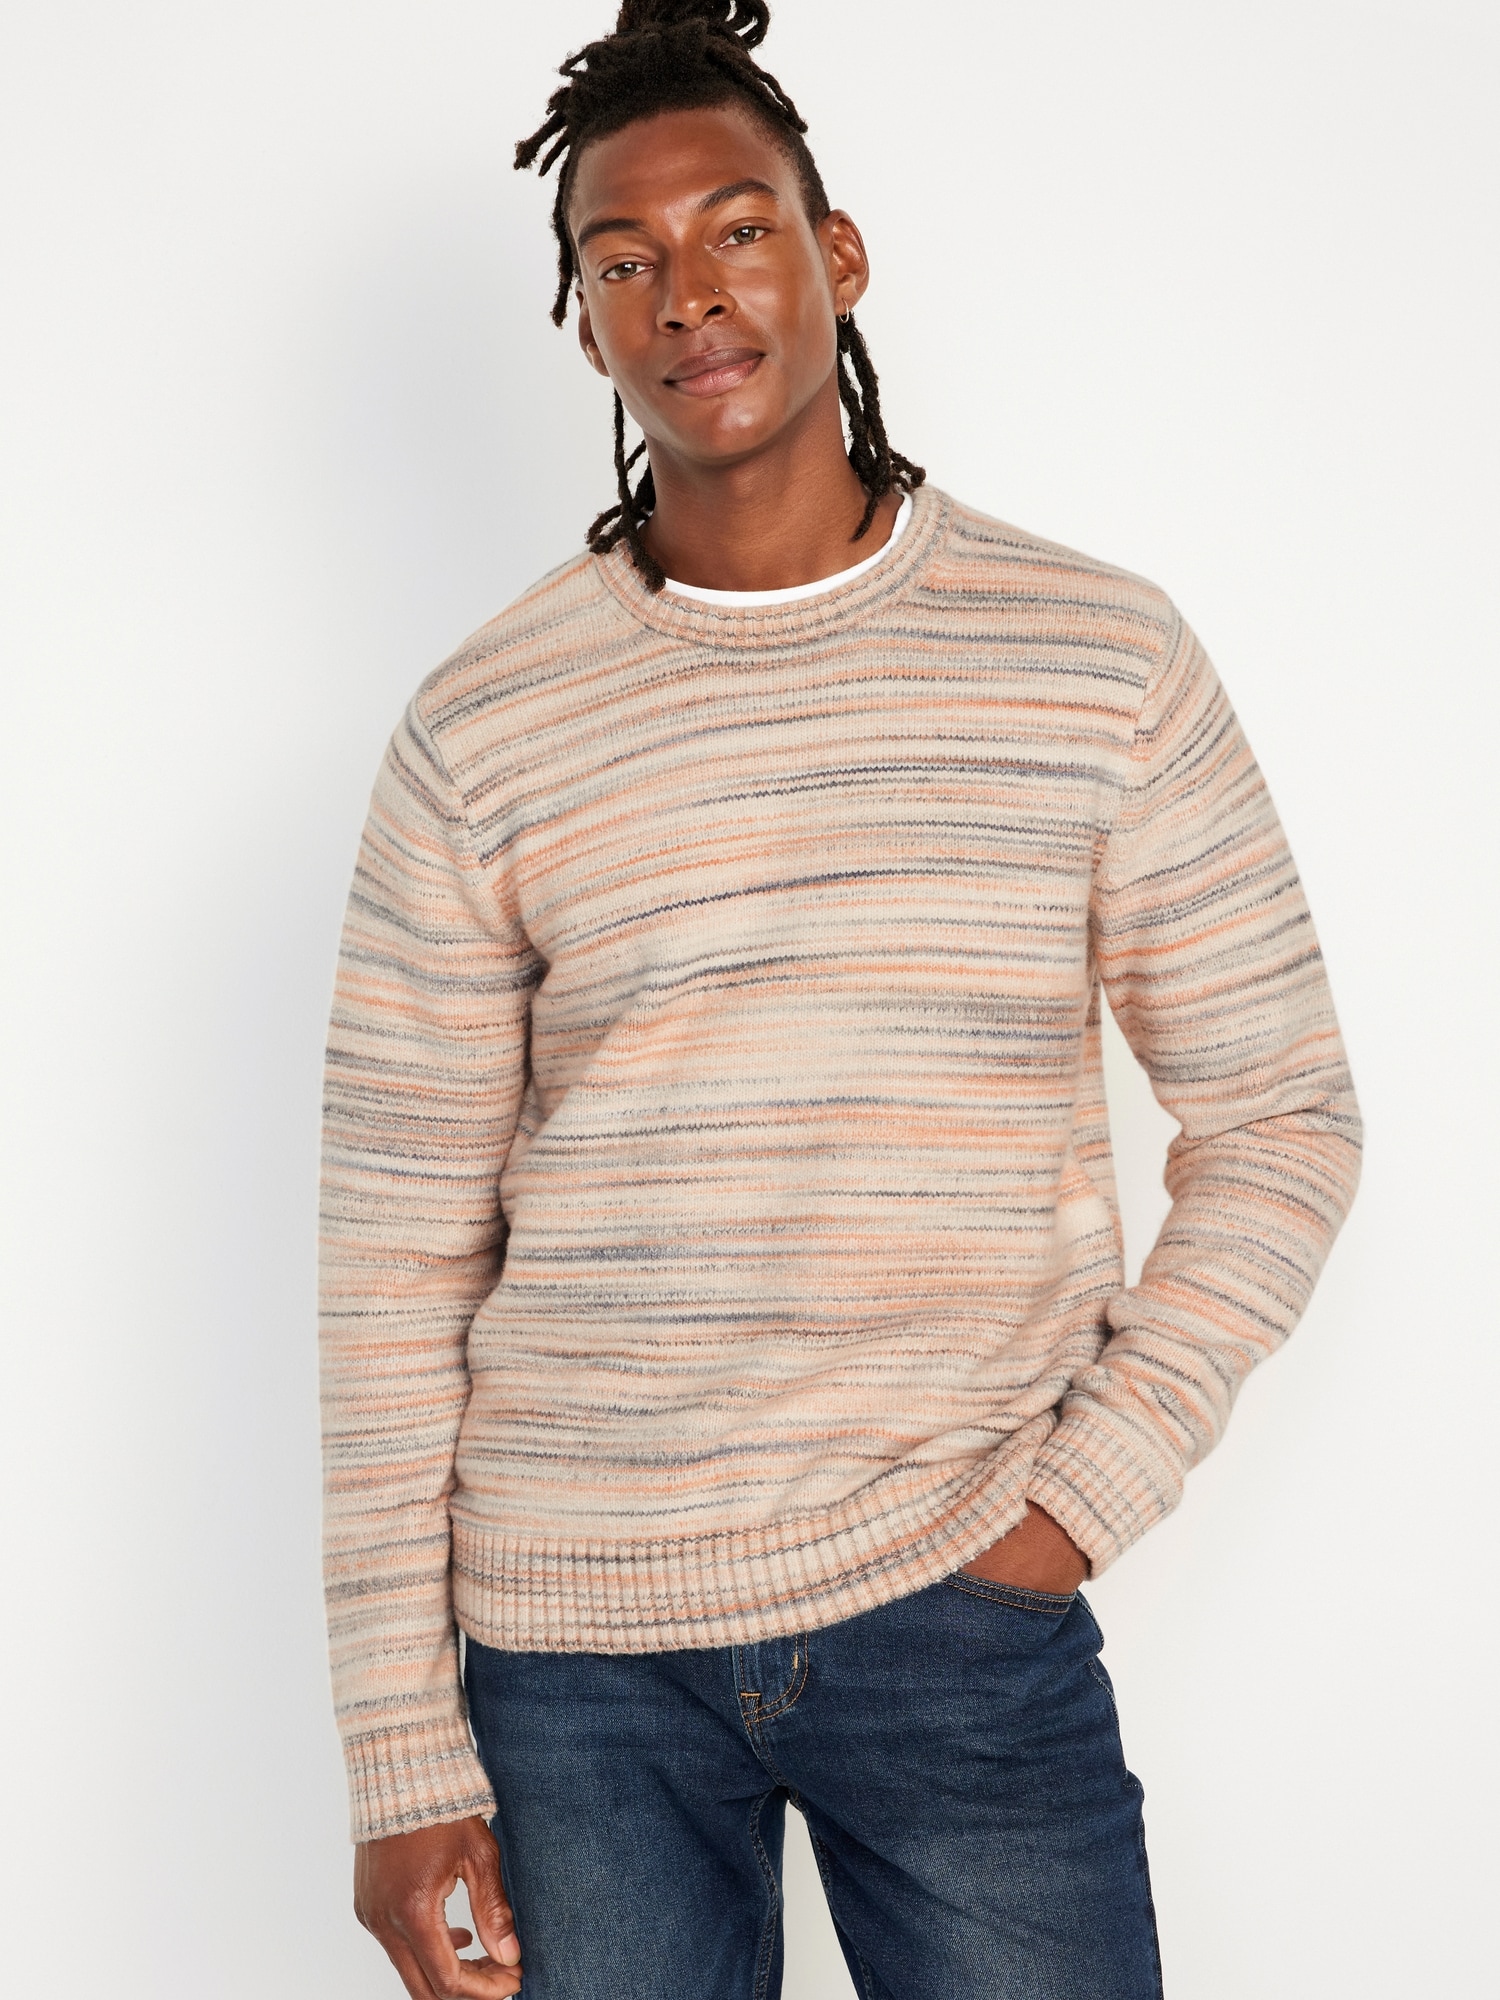 Colorful Knit Sweater | Old Navy